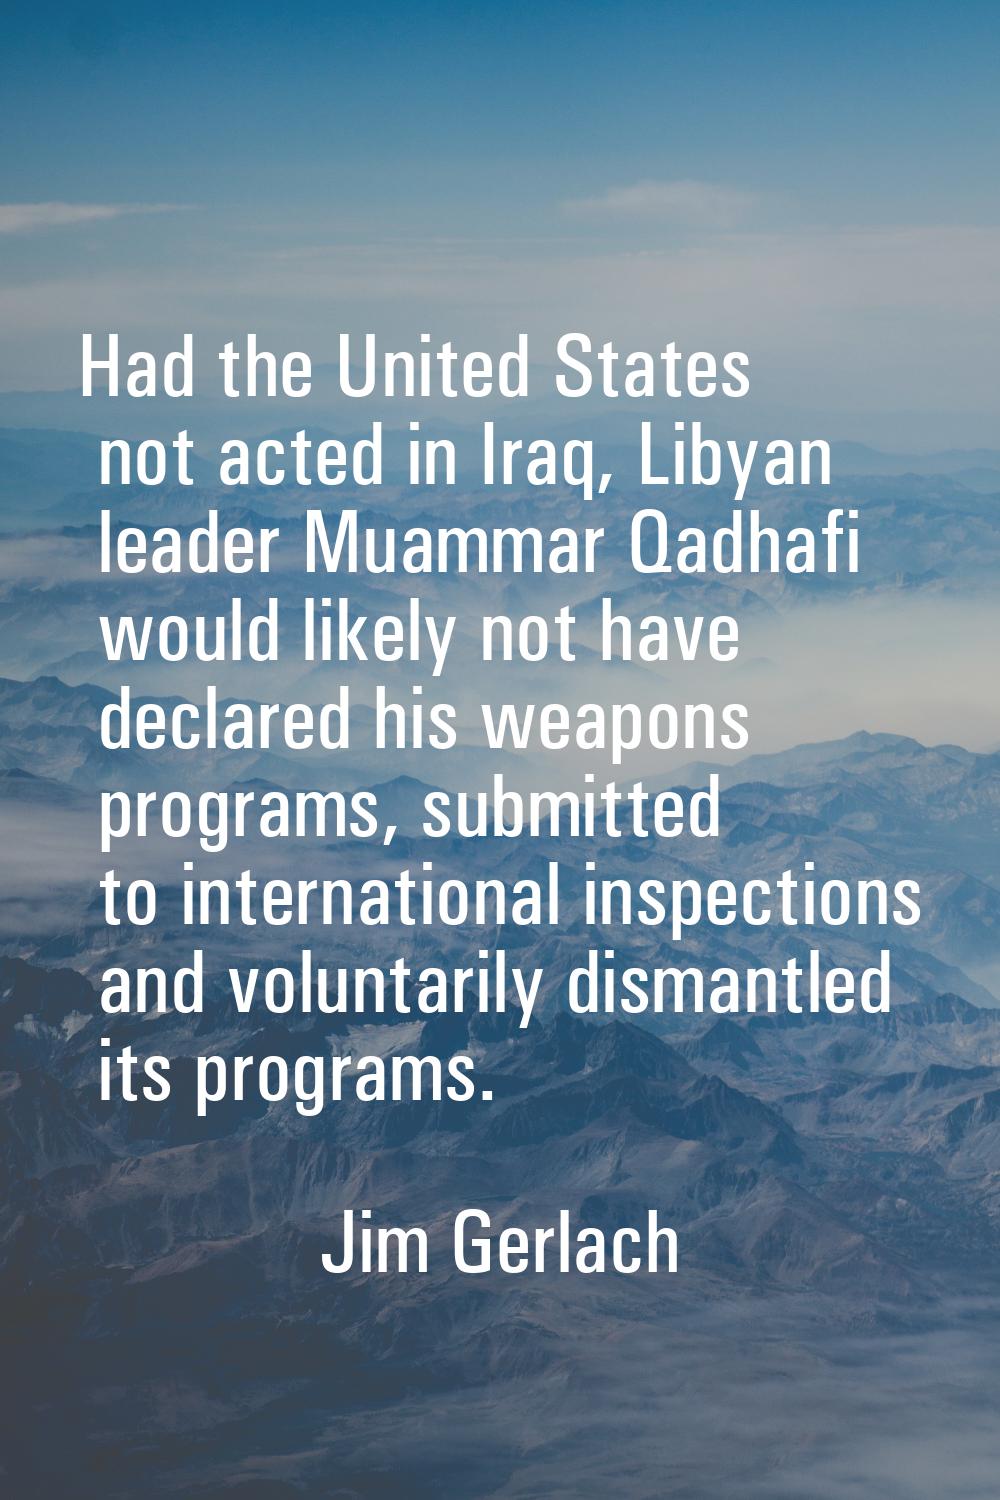 Had the United States not acted in Iraq, Libyan leader Muammar Qadhafi would likely not have declar